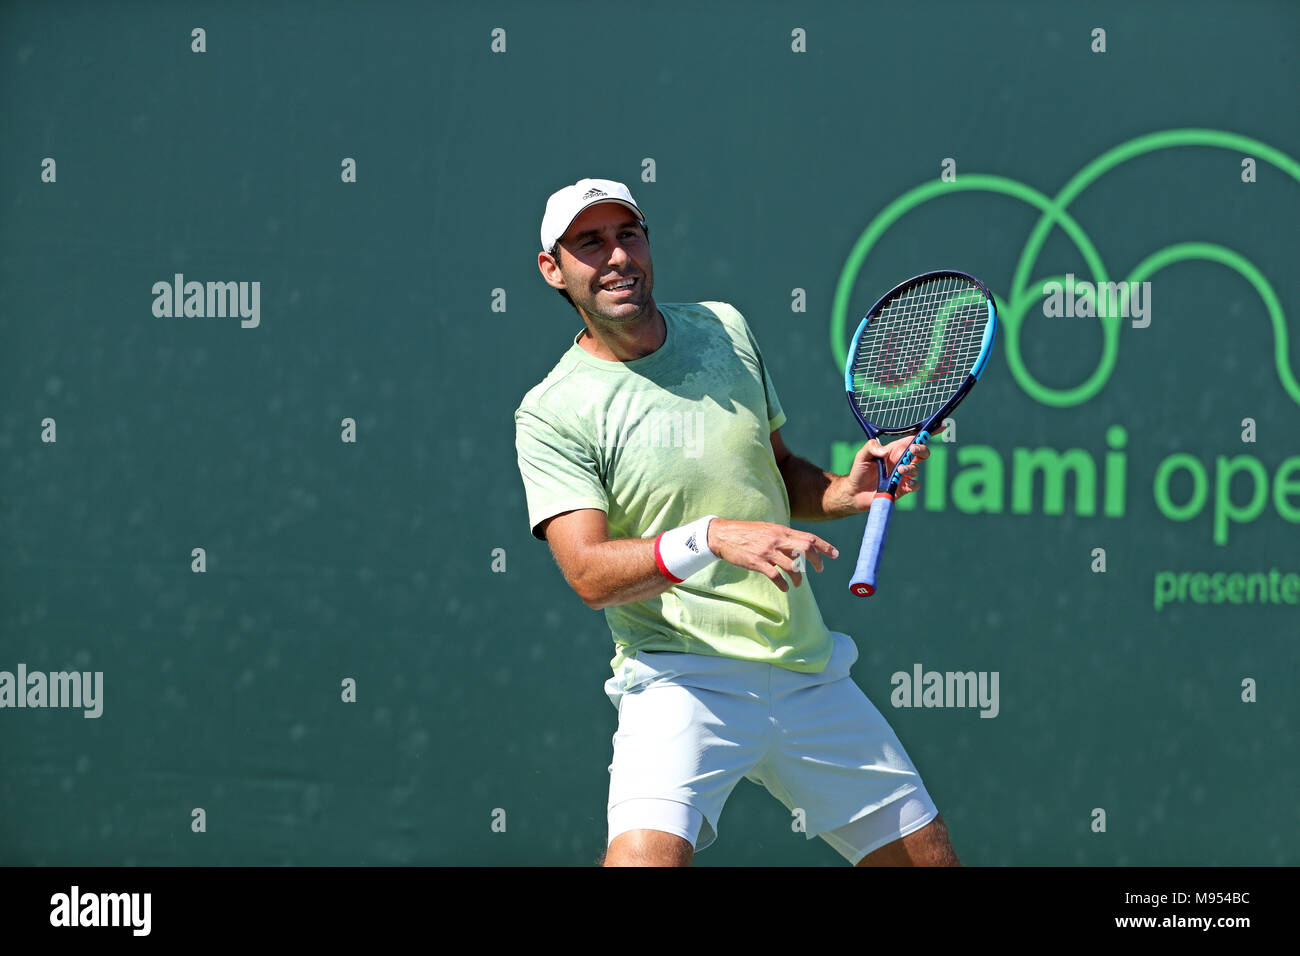 KEY BISCAYNE, FL - MARCH 22: Fernando Verdasco during Day 4 of the Miami Open at the Crandon Park Tennis Center. Alexander 'Sascha' Zverev Jr. is a German professional tennis player. He is currently the youngest player in the ATP top 30. Zverev finished the 2017 season ranked world No. 4 on March 22, 2018 in Key Biscayne, Florida   People:  Fernando Verdasco Stock Photo